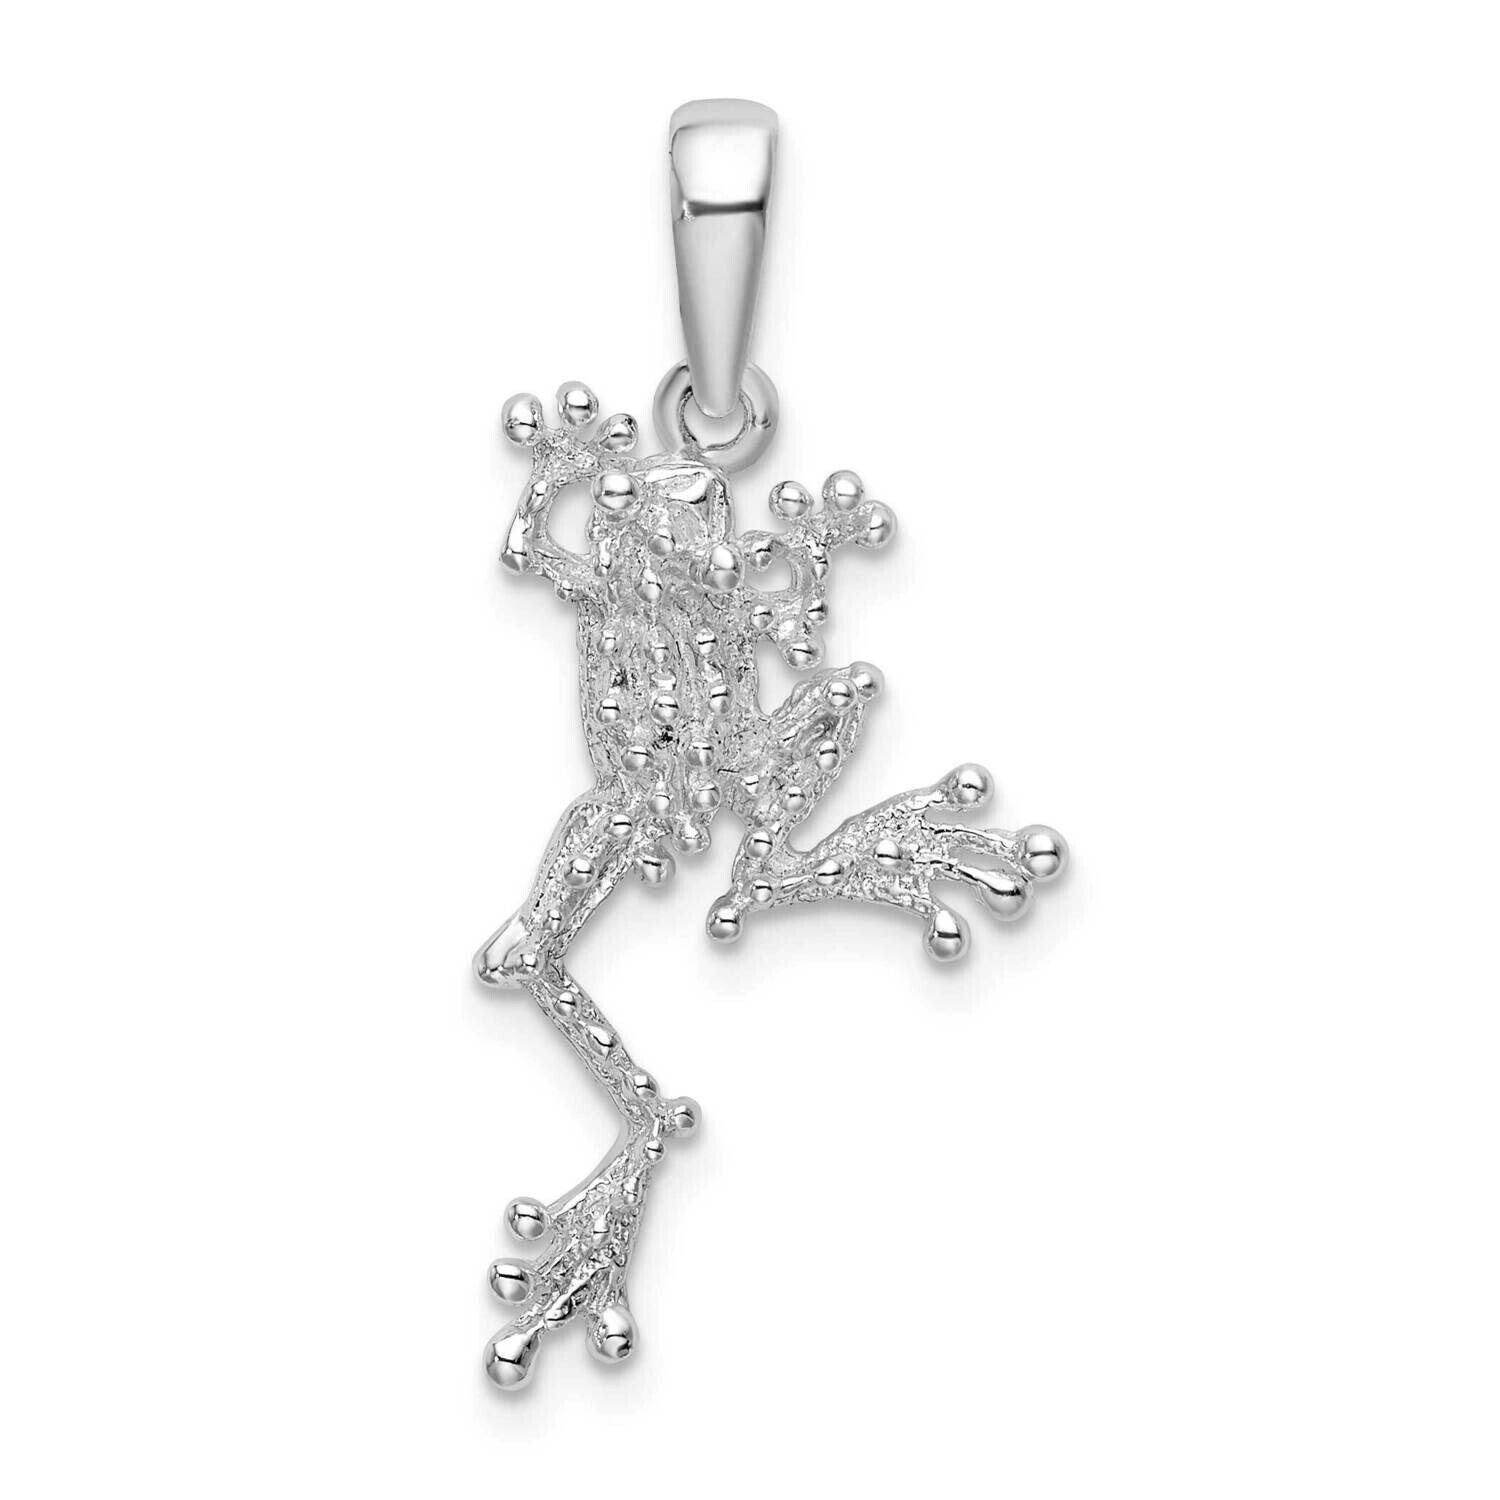 Jumping Frog Pendant Sterling Silver Polished QC9928